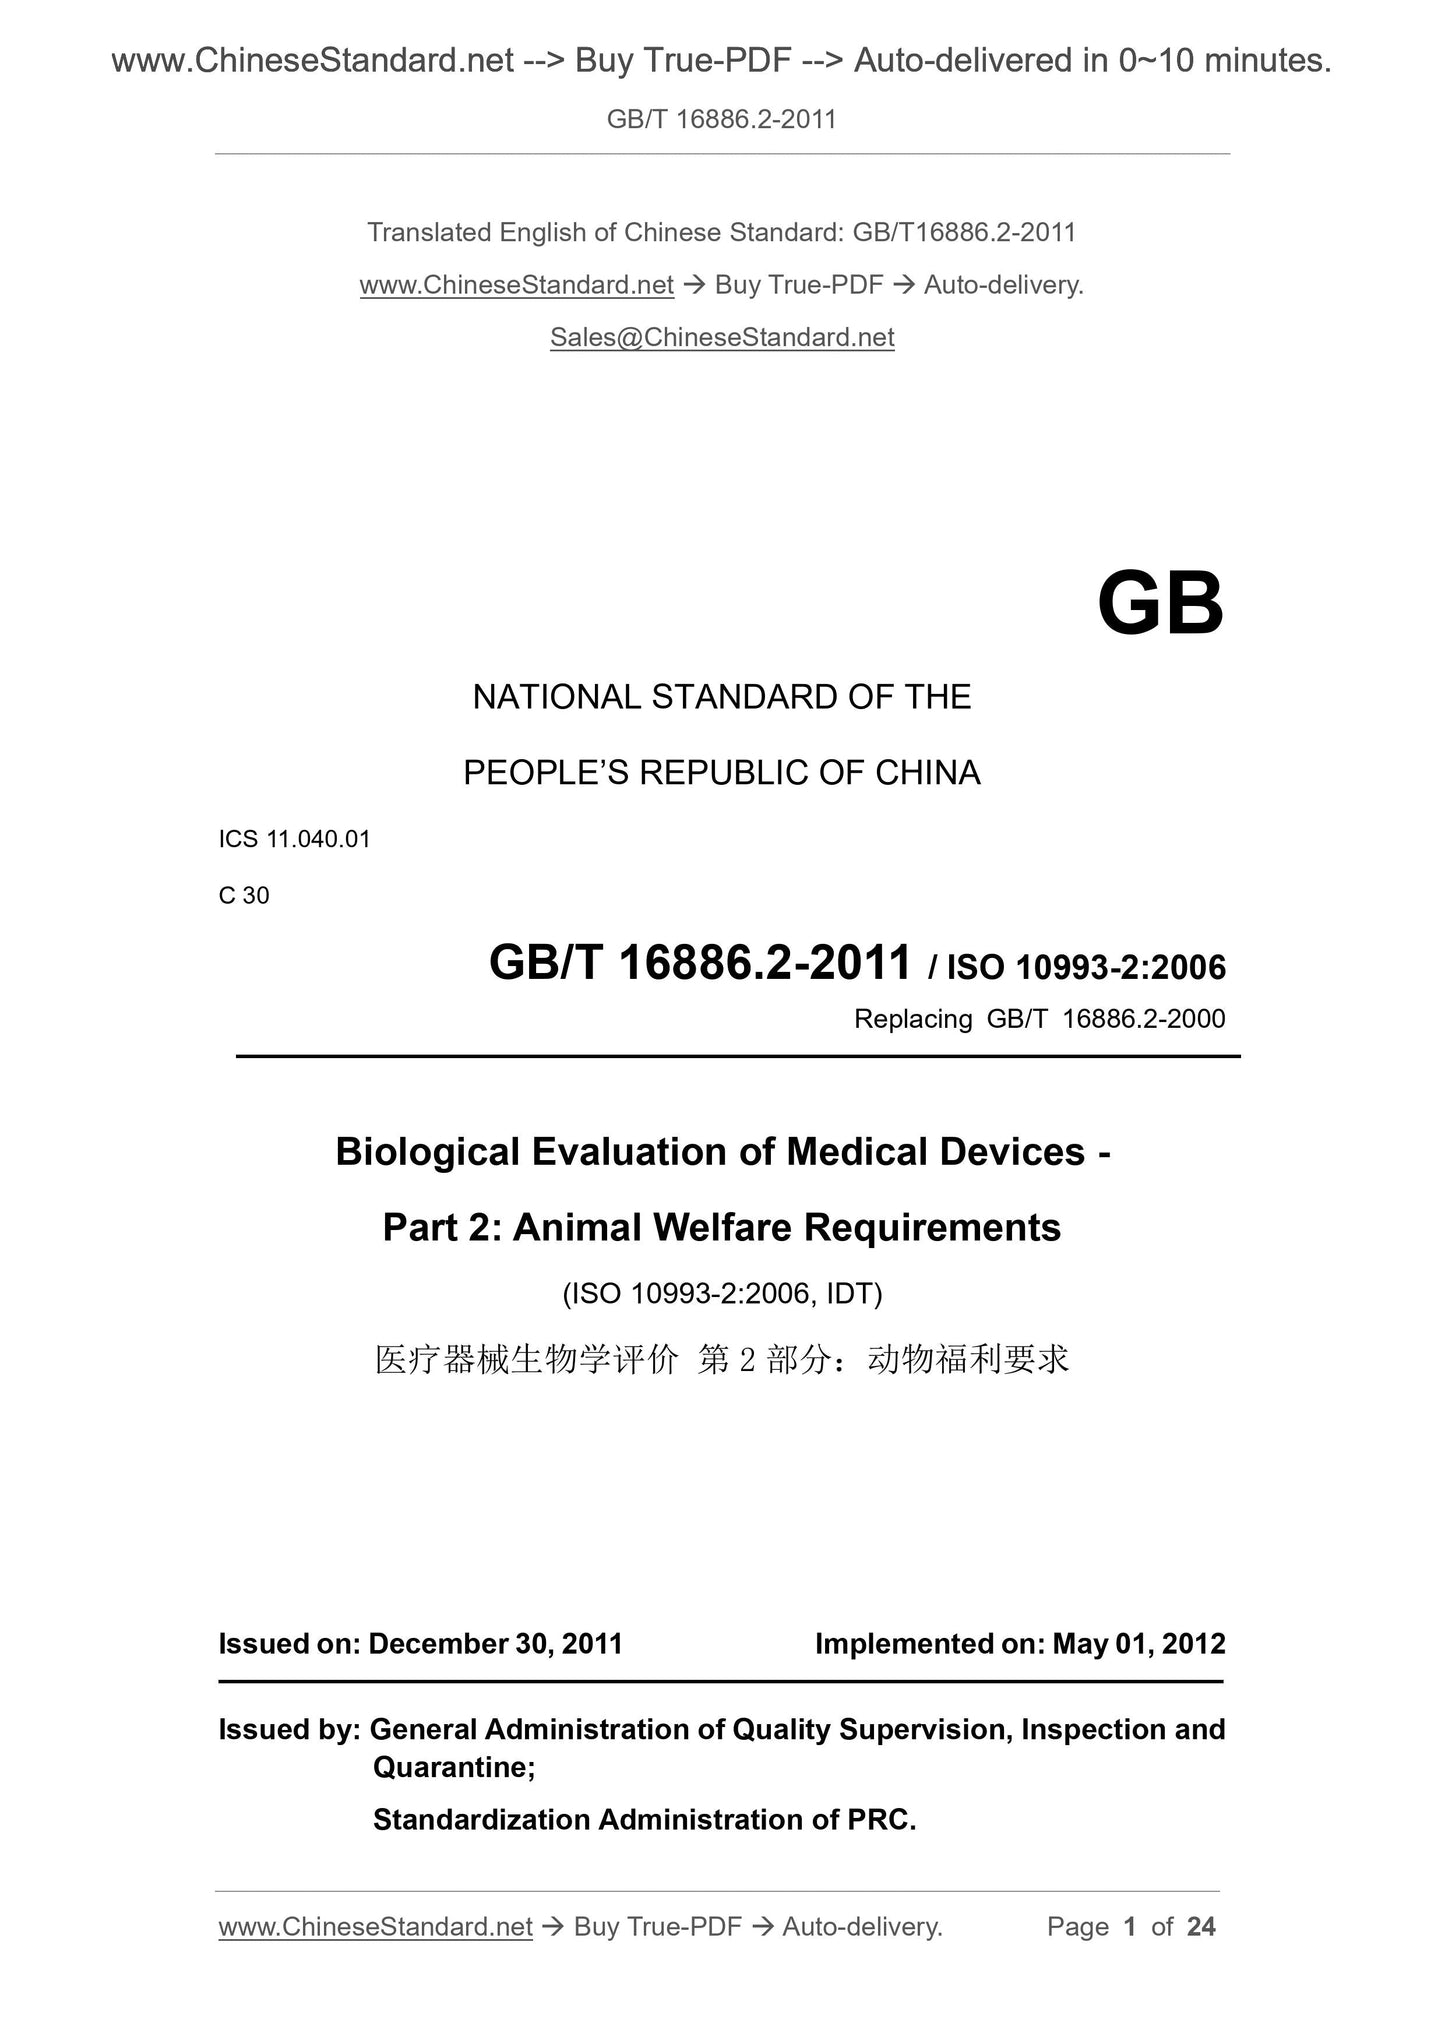 GB/T 16886.2-2011 Page 1